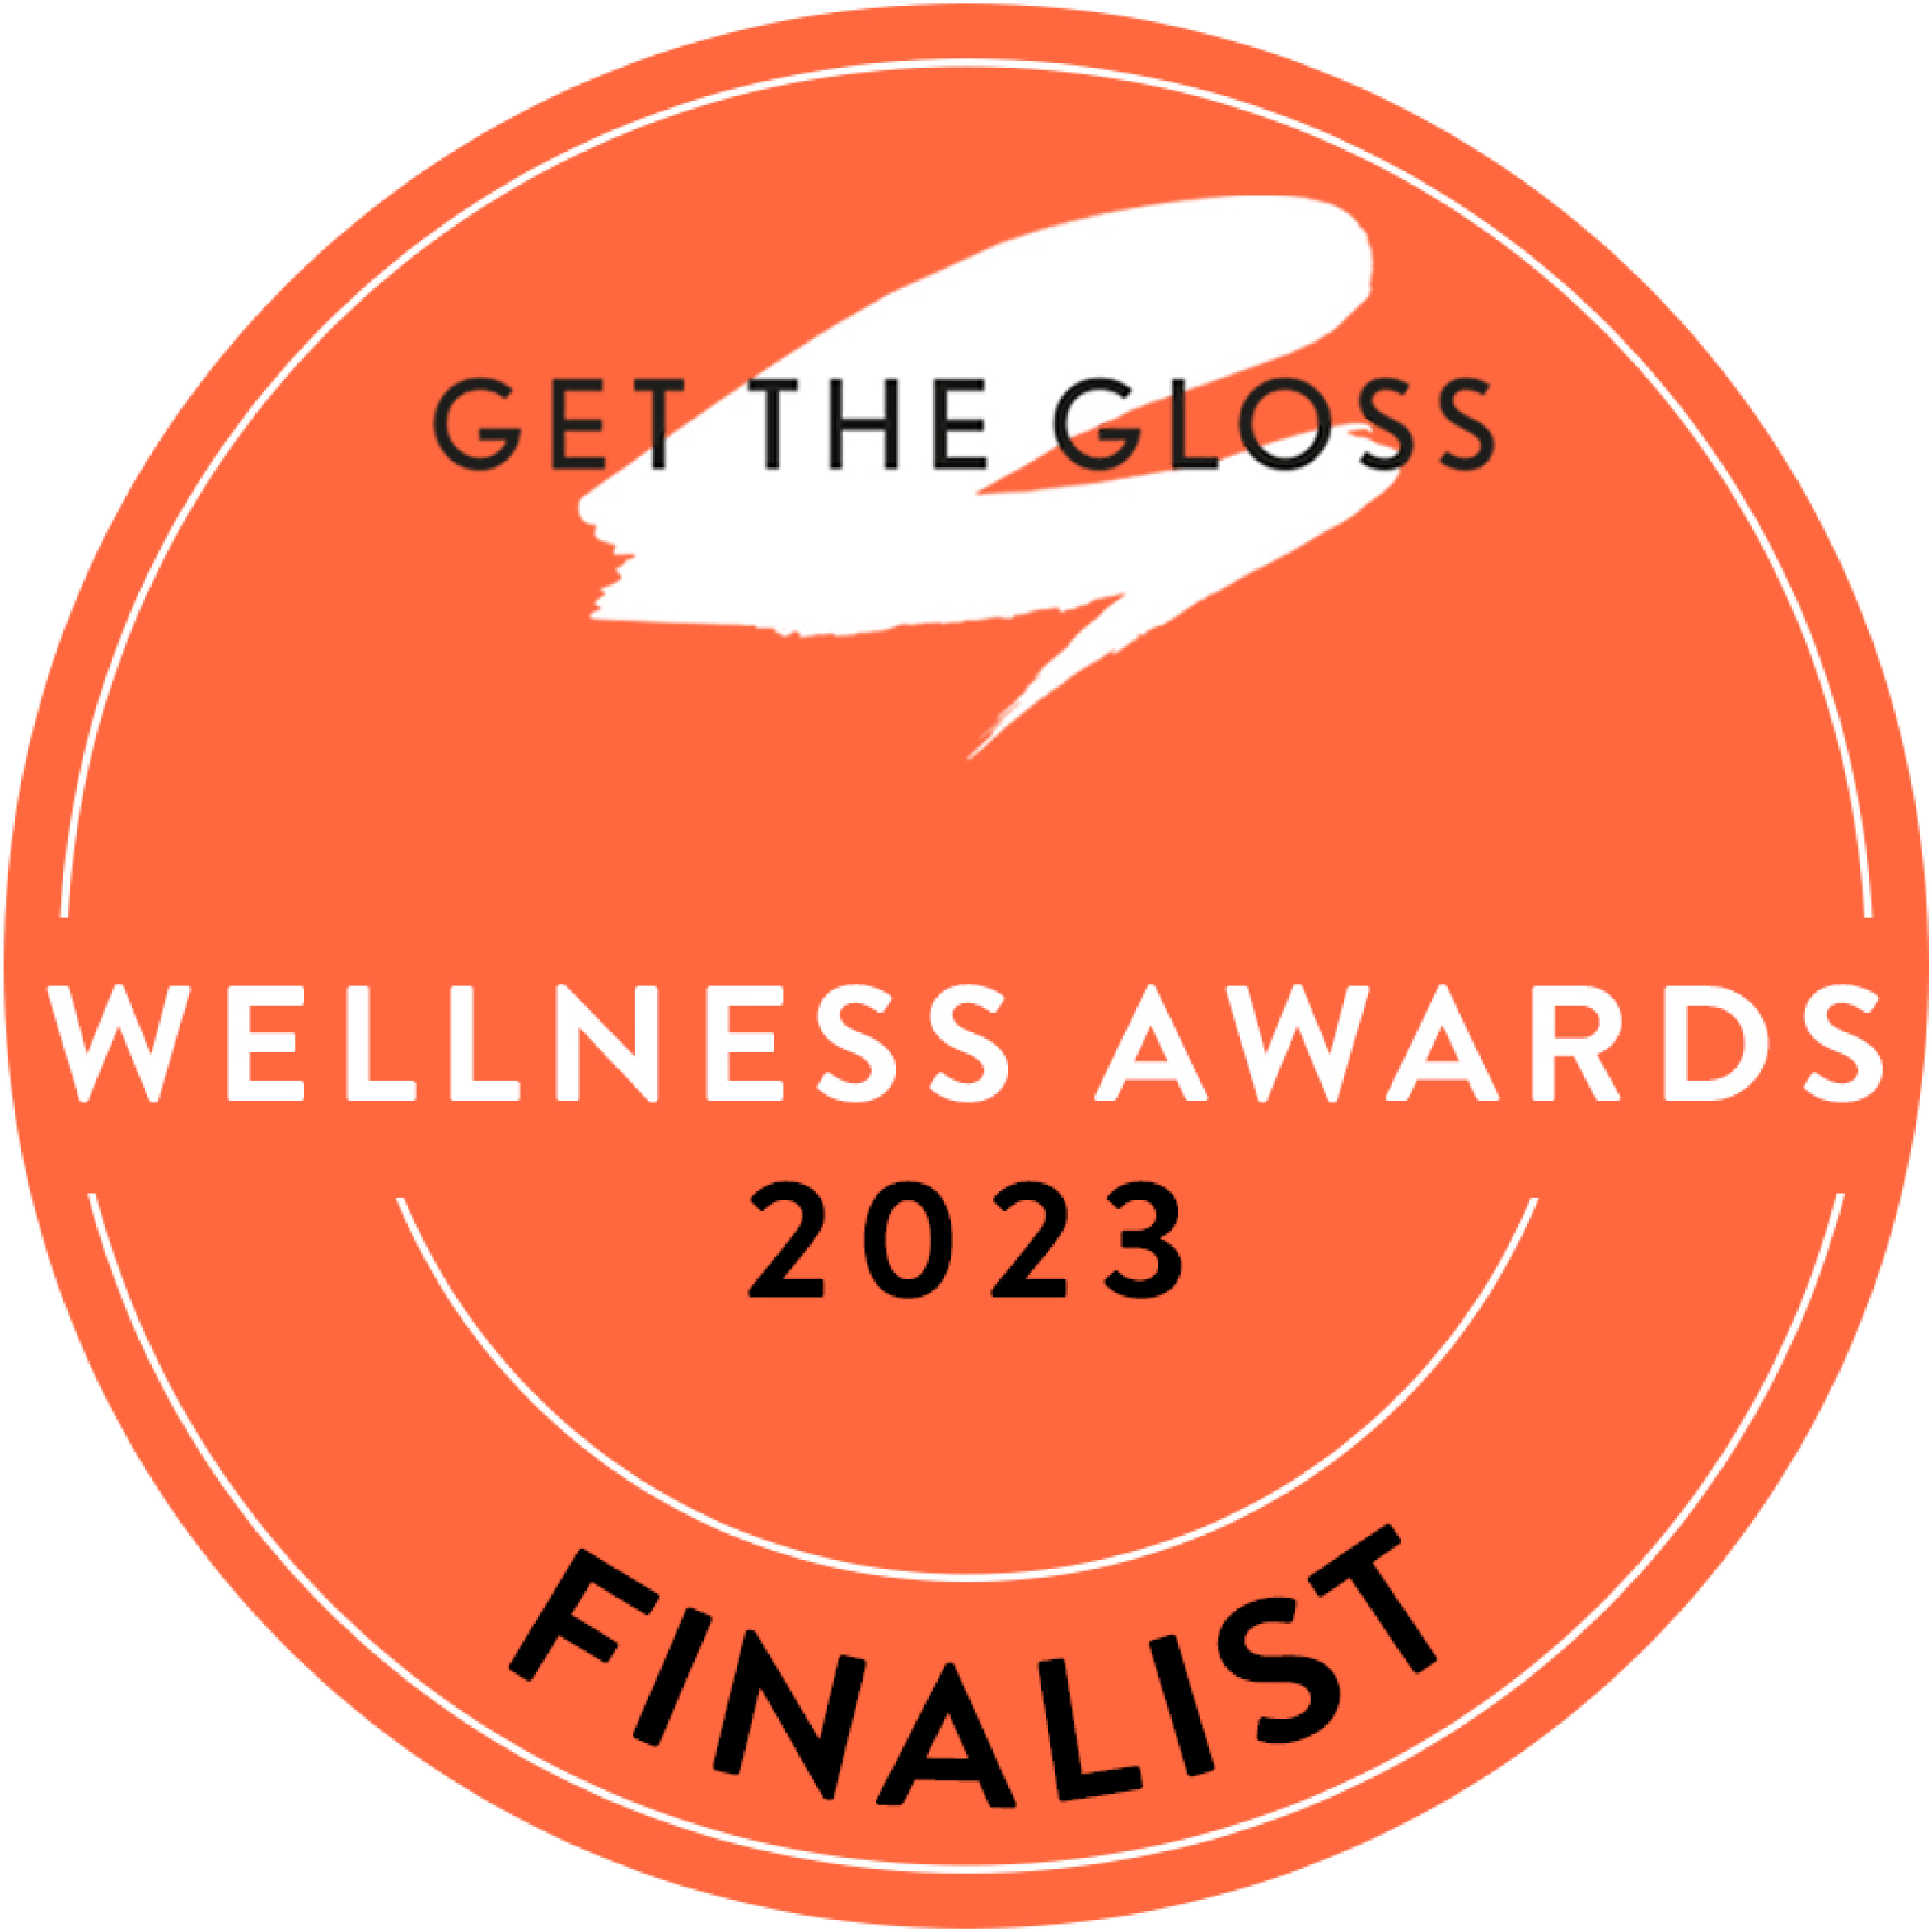 FREE-TO-USE_-Get-The-Gloss-Wellness-Awards-2023-Finalists.png